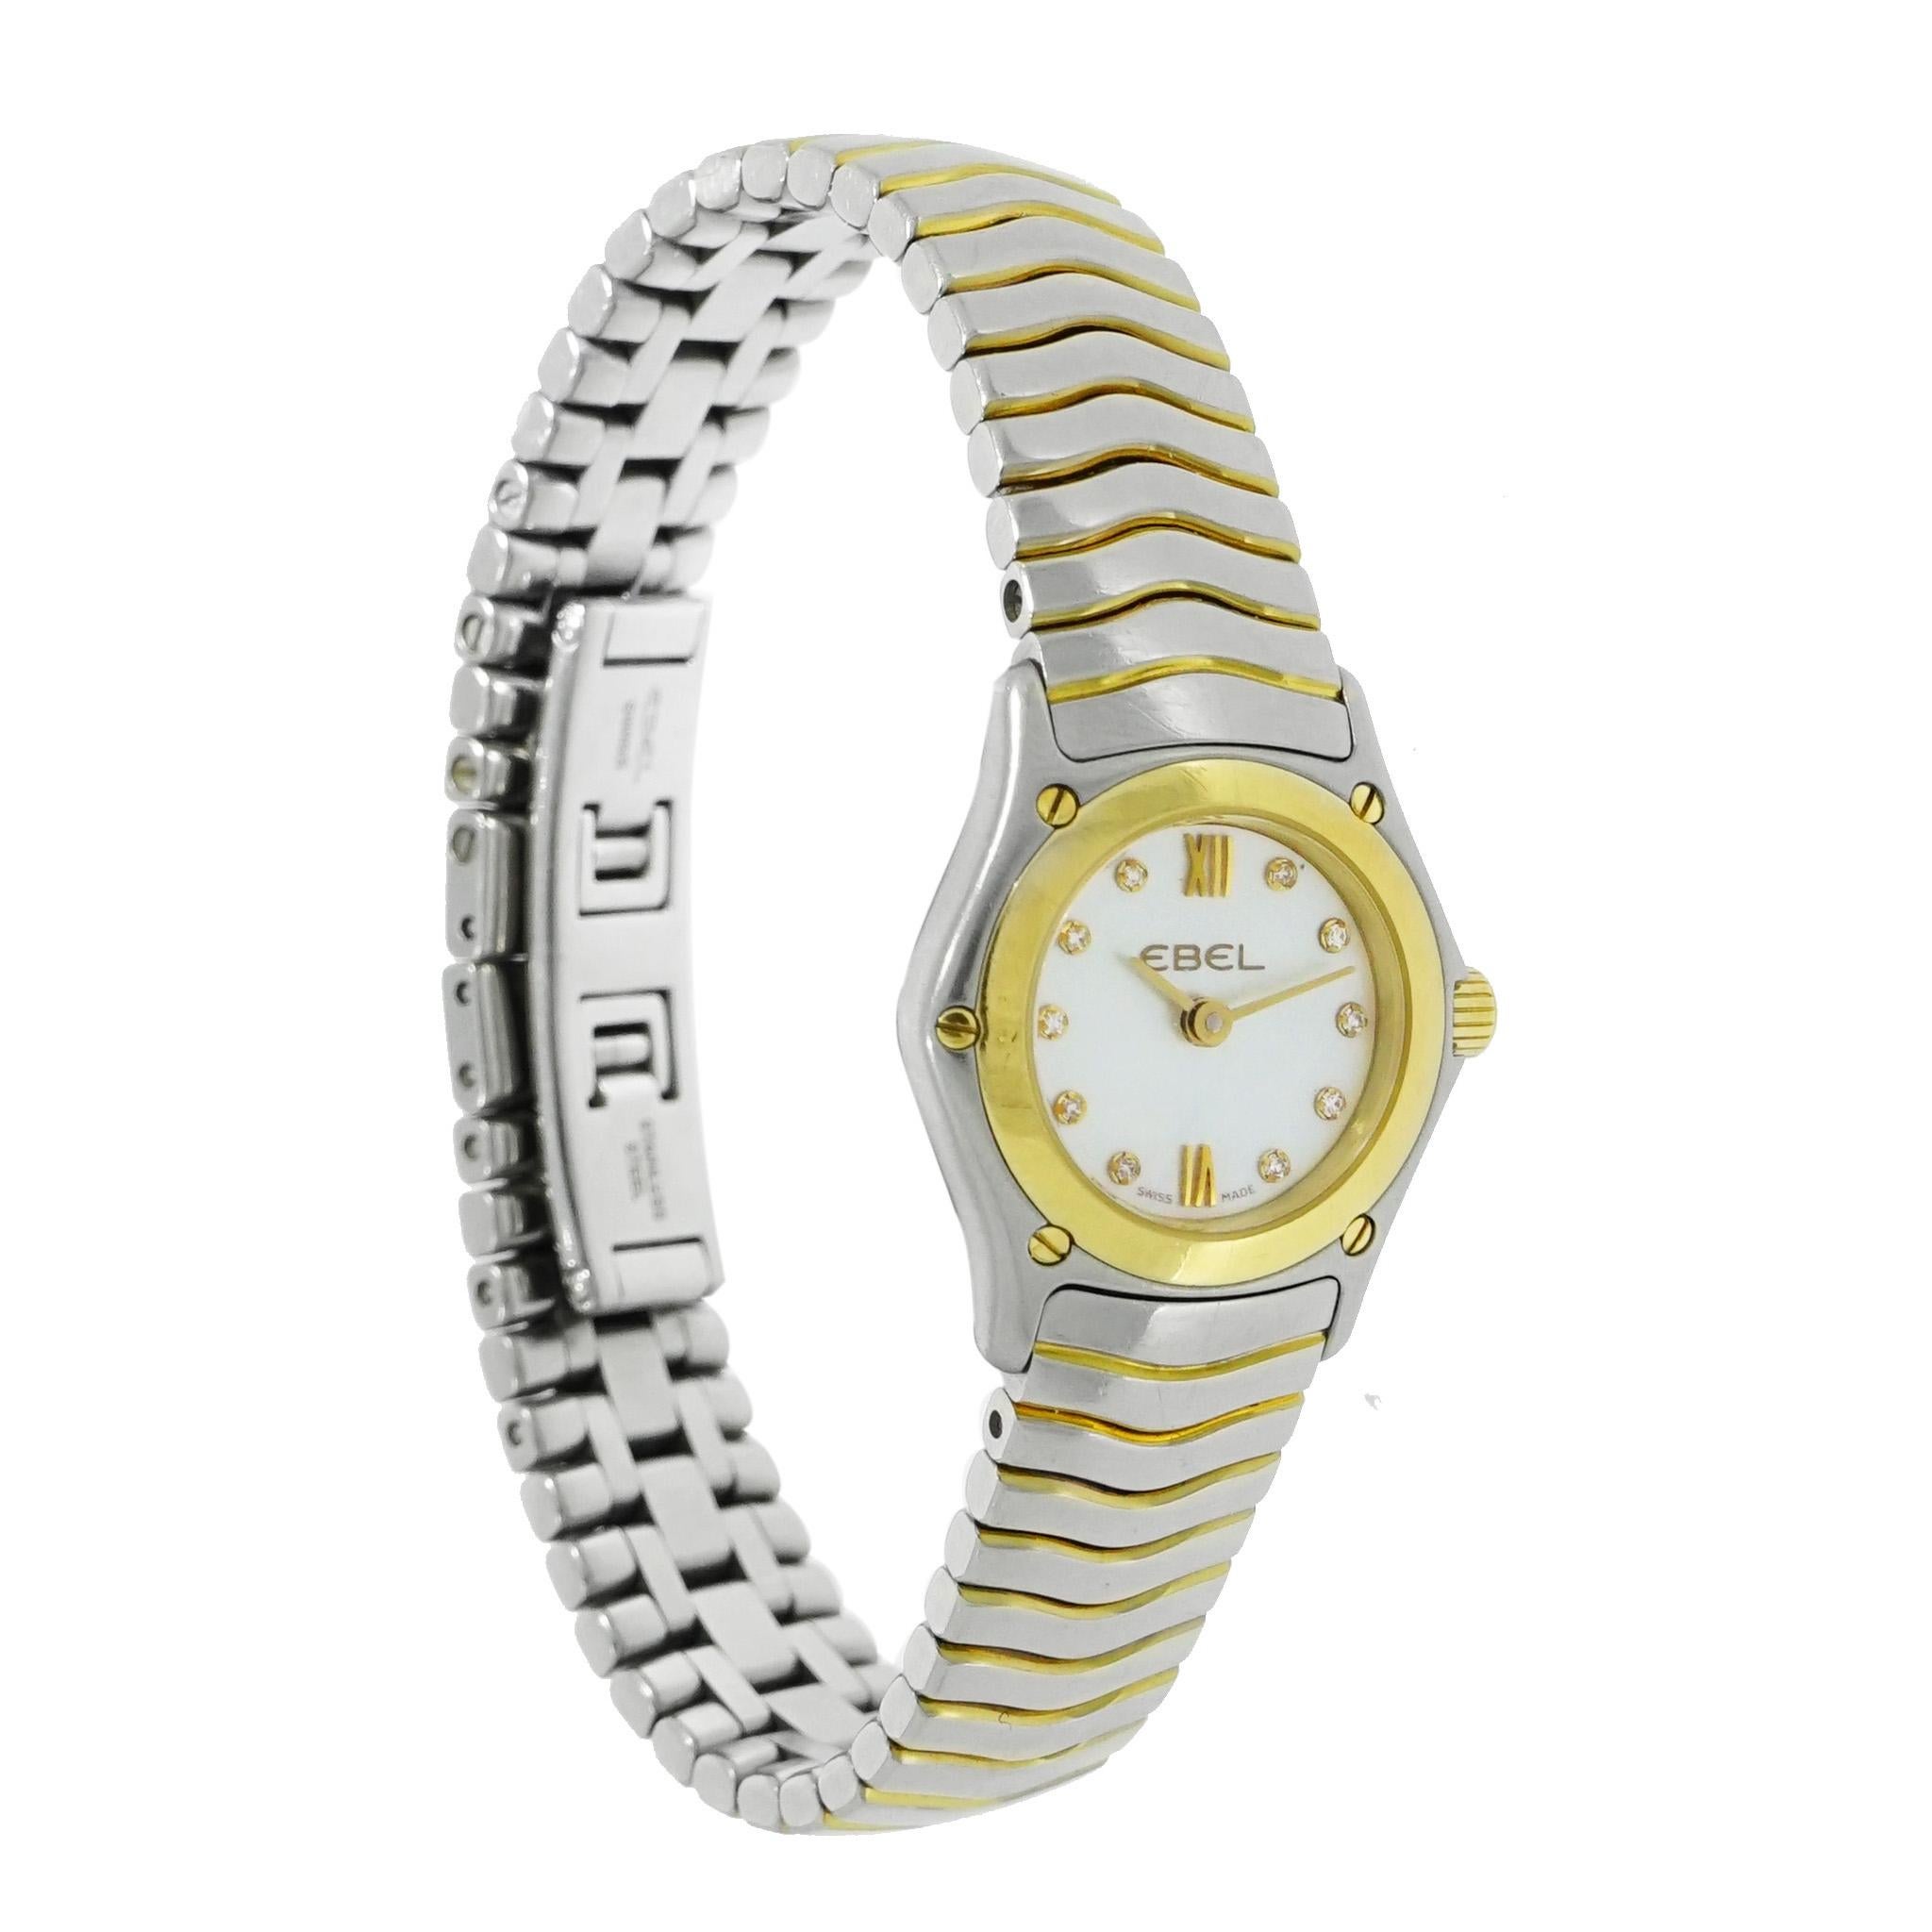 This lovely Ebel Classic Wave lady's watch is perfect for the beautiful woman with style.
The watch is crafted in 18K Yellow Gold and Stainless Steel Case, (measuring 23mm in diameter and 6mm in thickness). 18K Yellow Gold and Stainless Steel